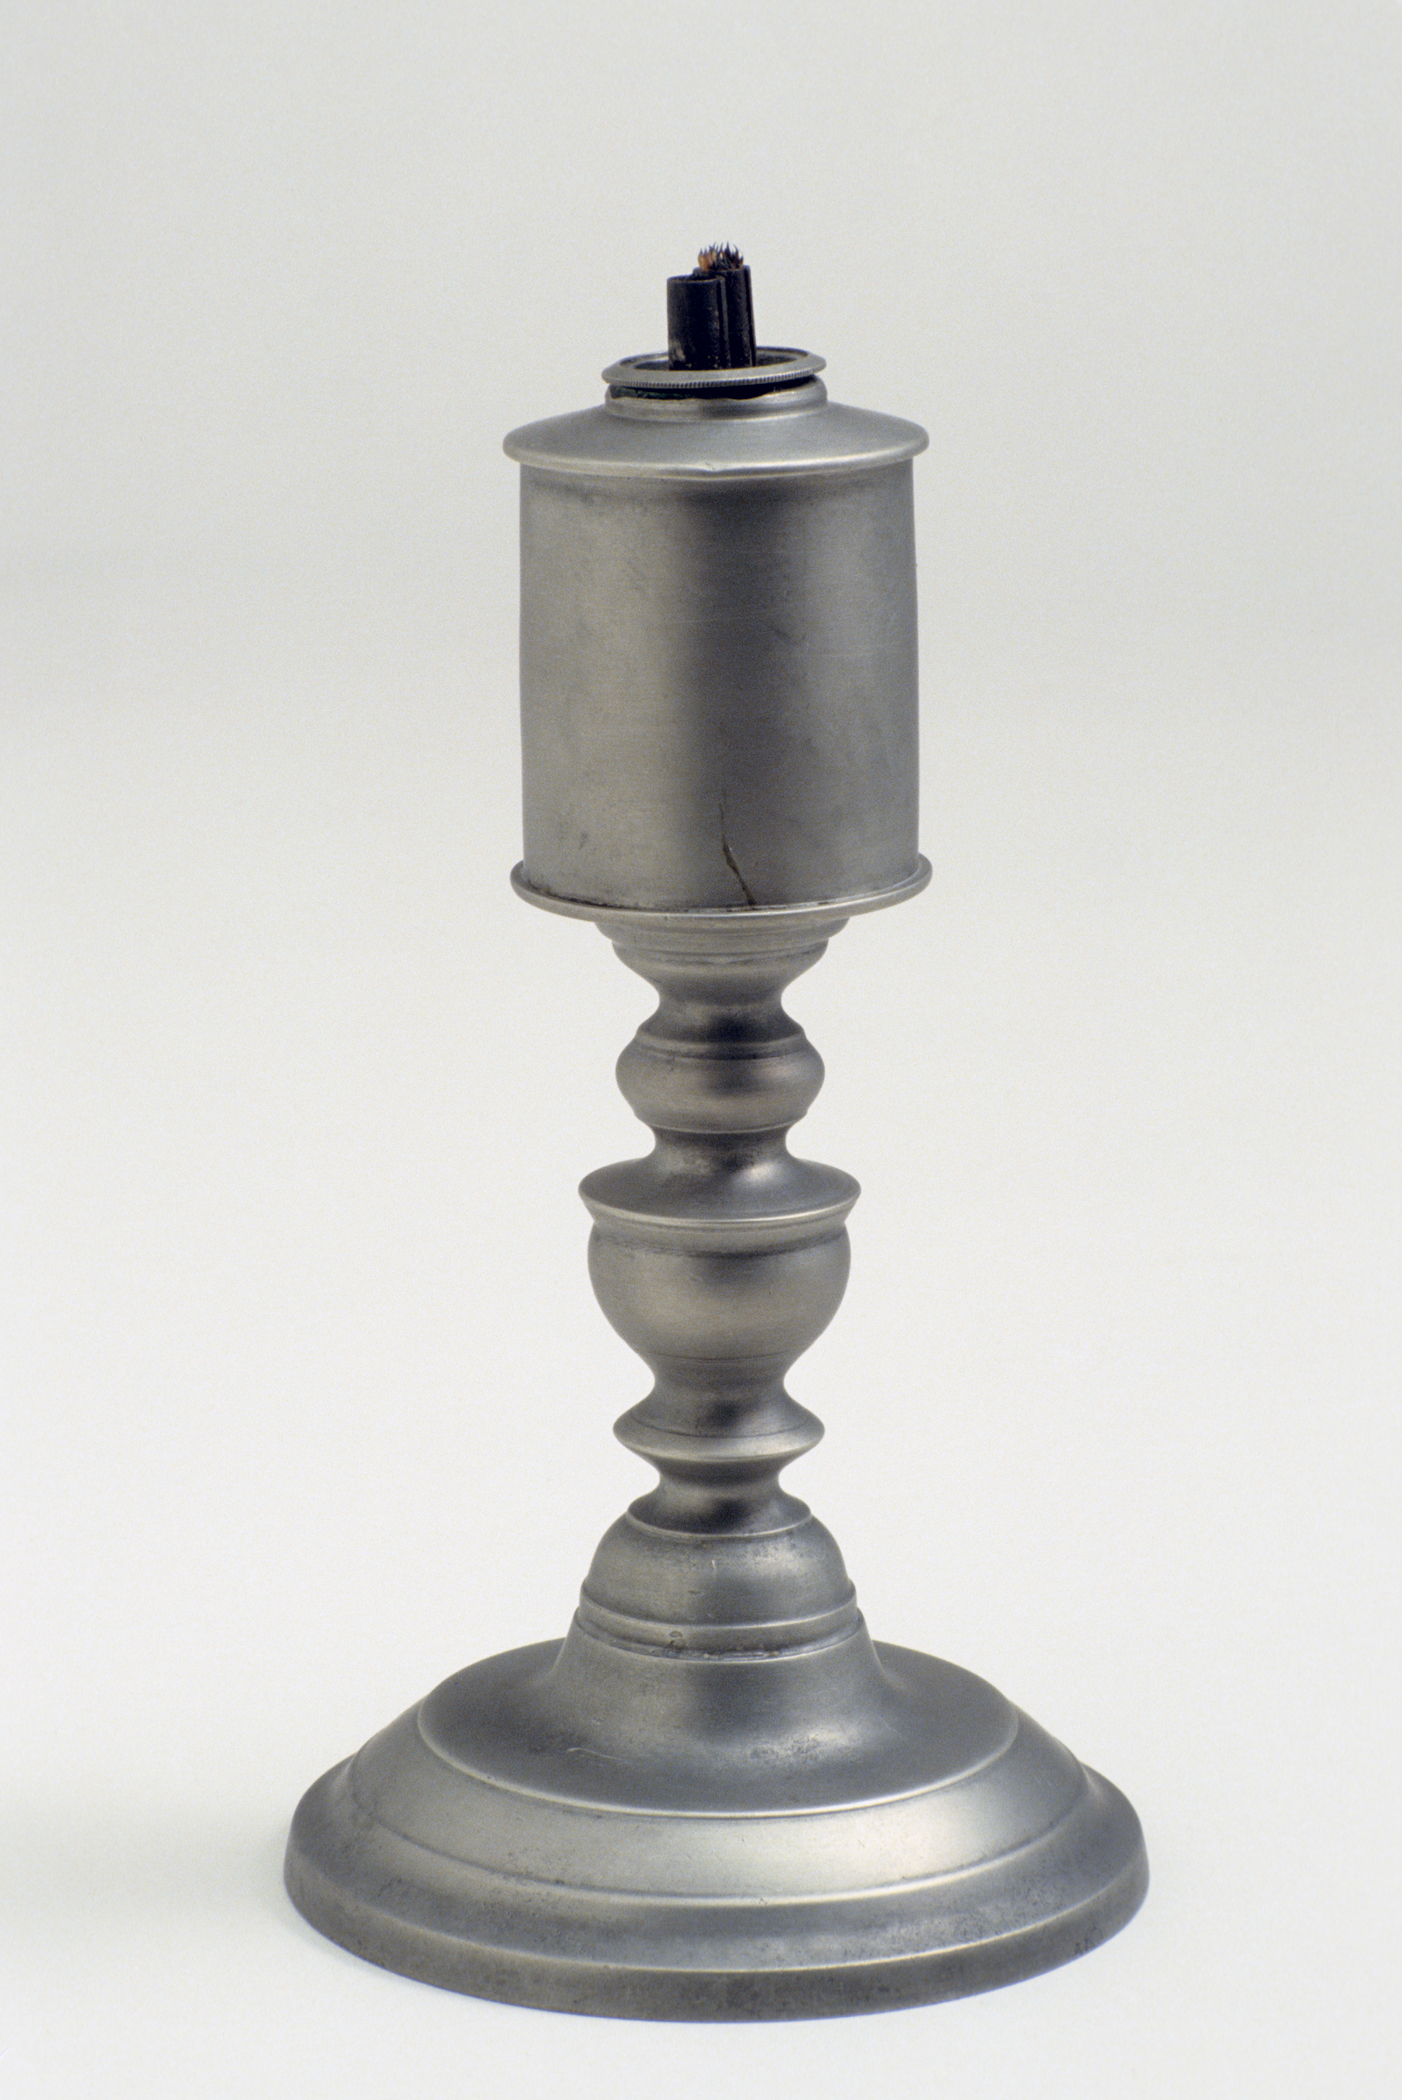 1958.0674 A, B Pewter lamp